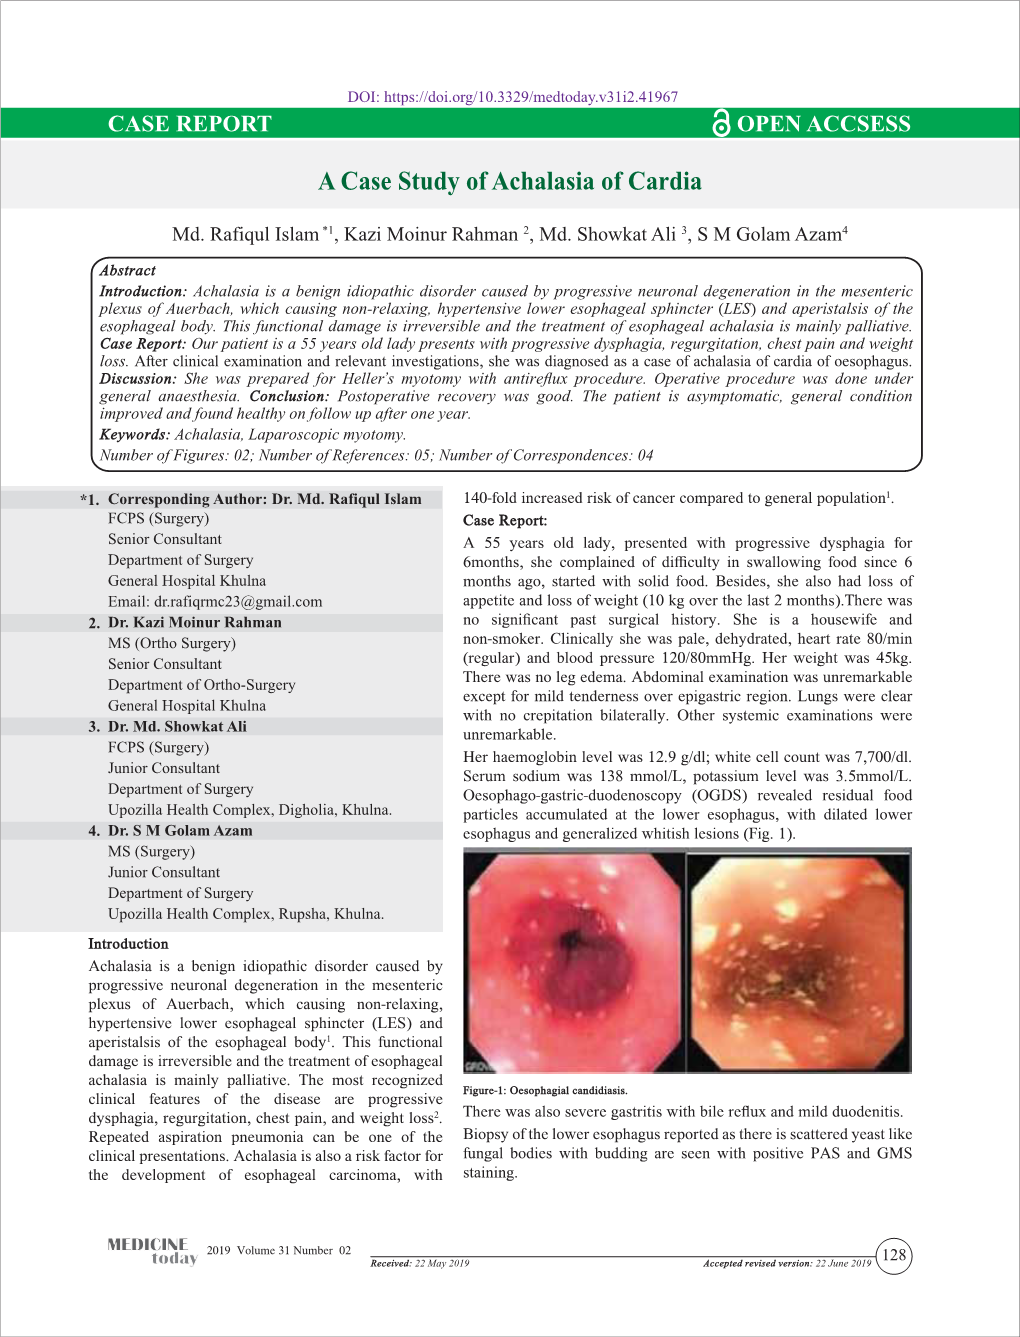 A Case Study of Achalasia of Cardia